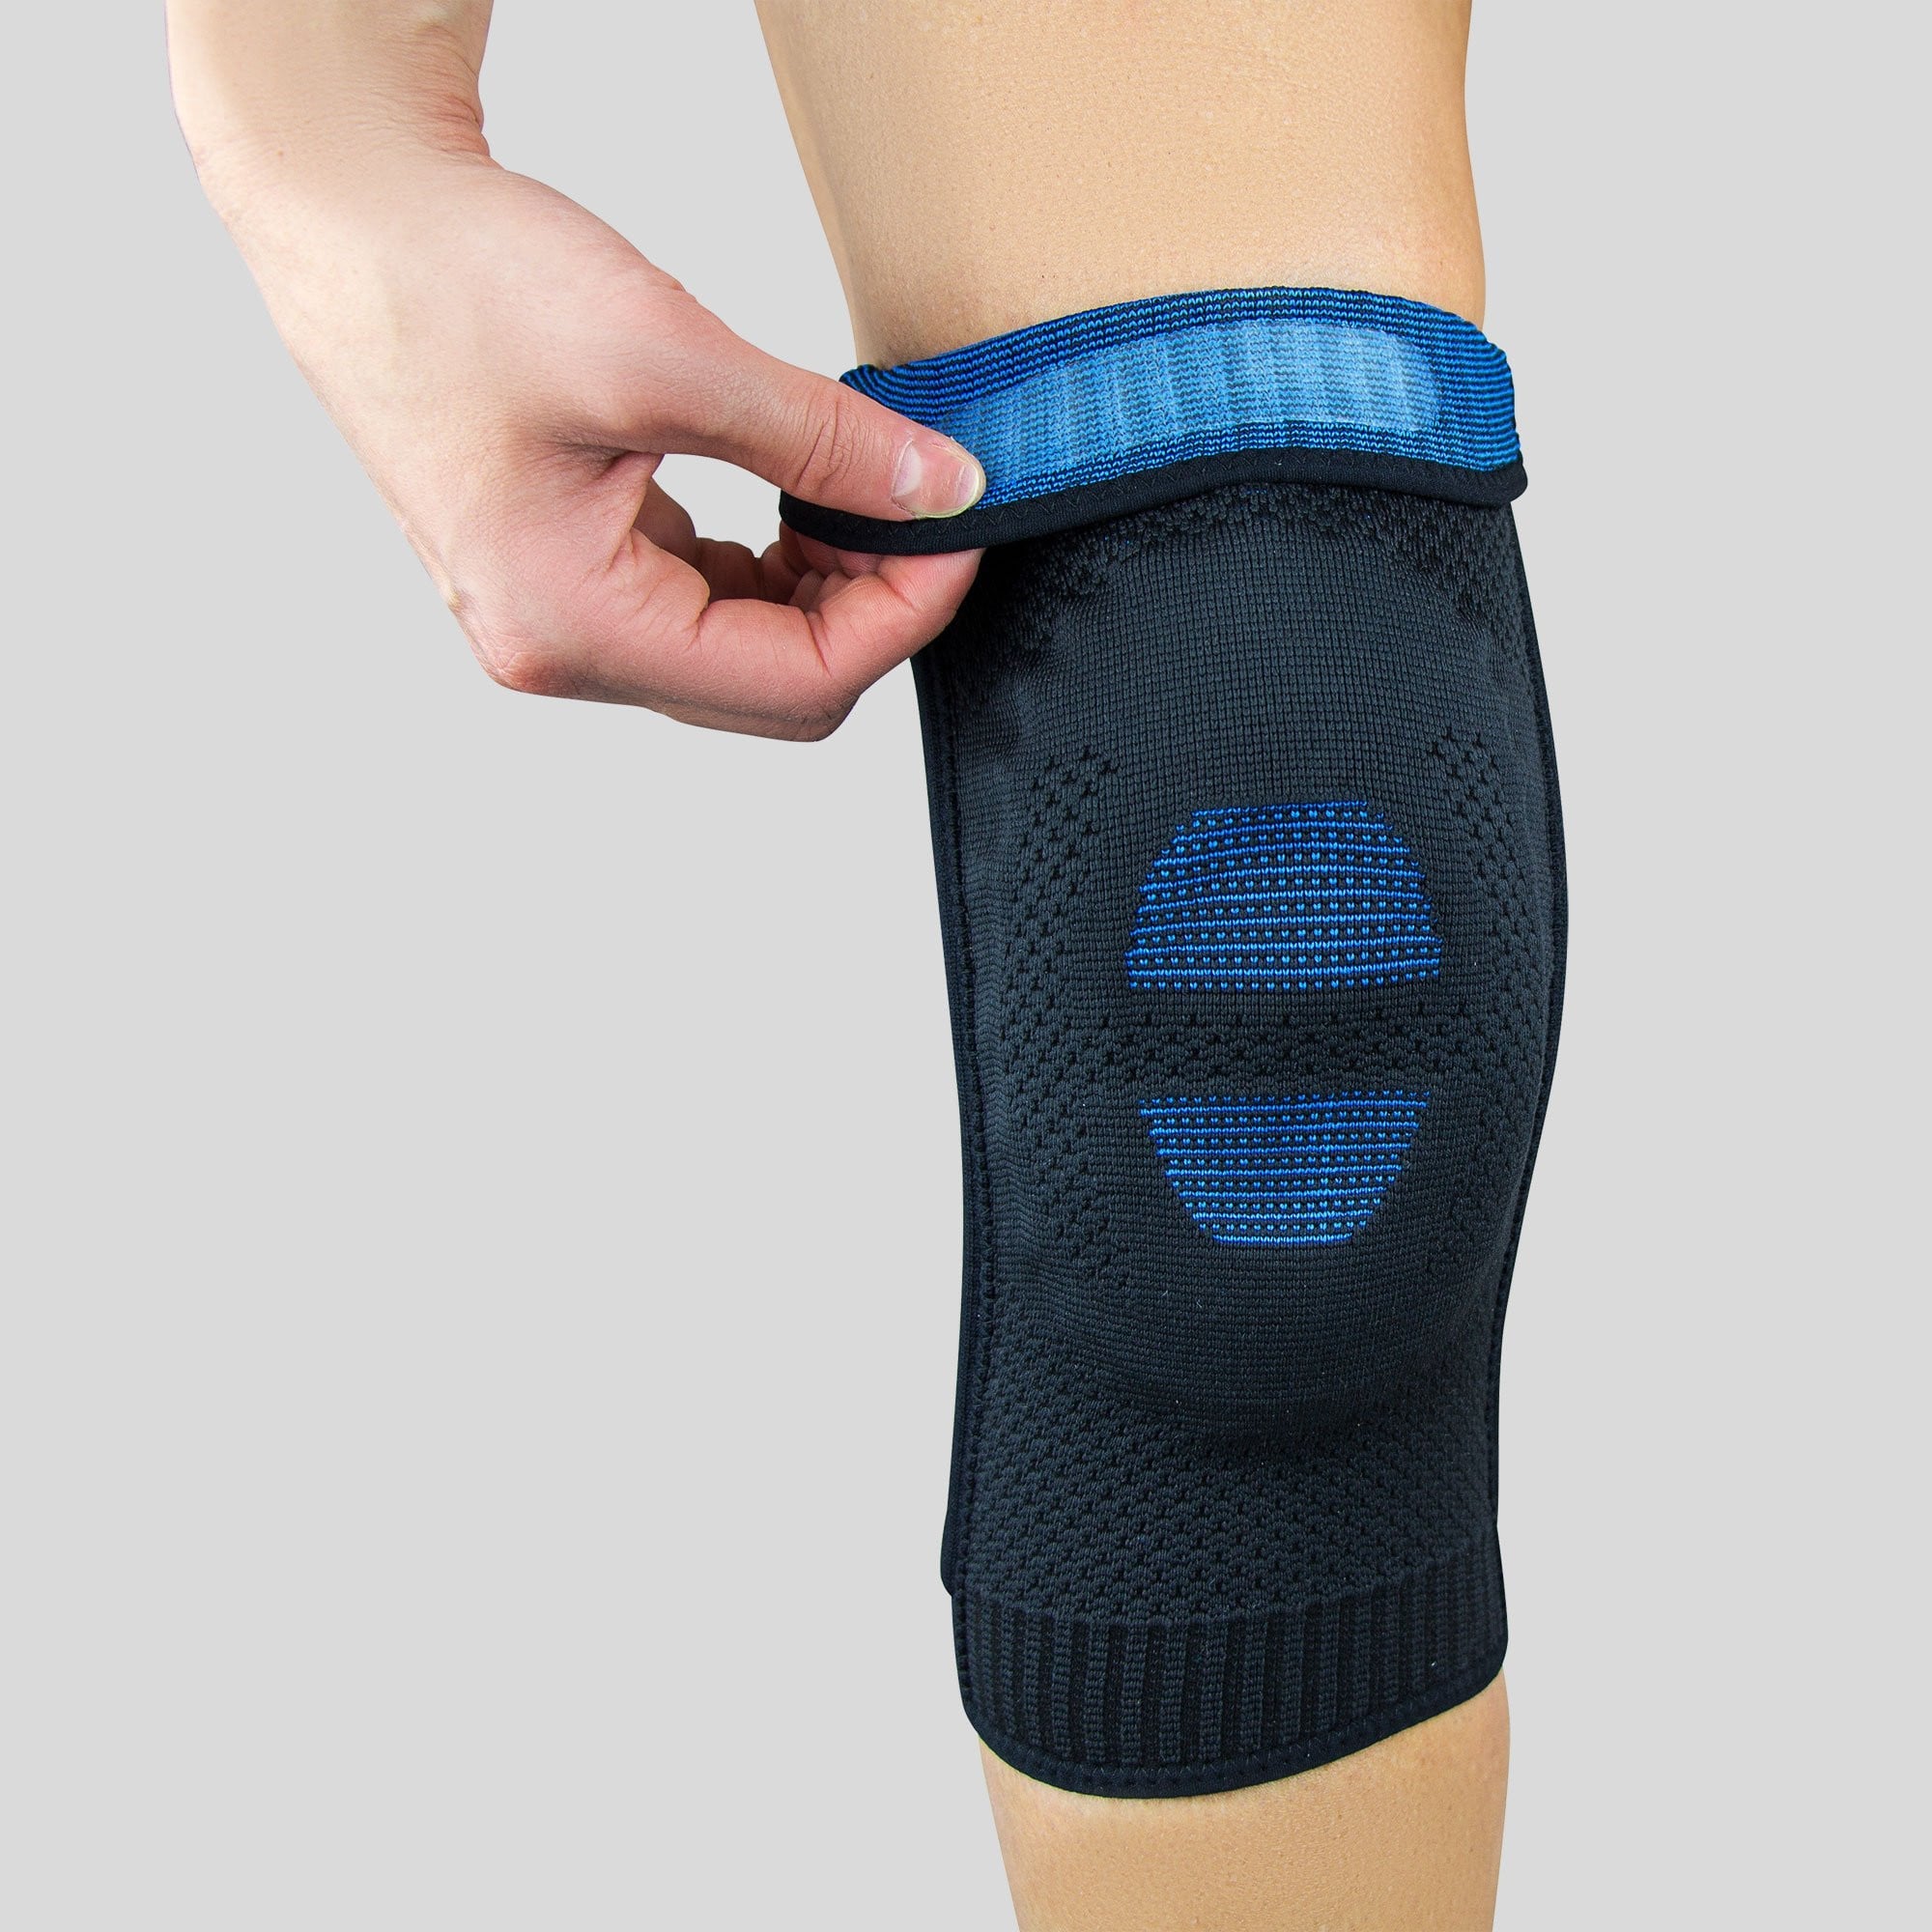 Full Leg Knee Brace Compression Sleeve Support with Patella Gel